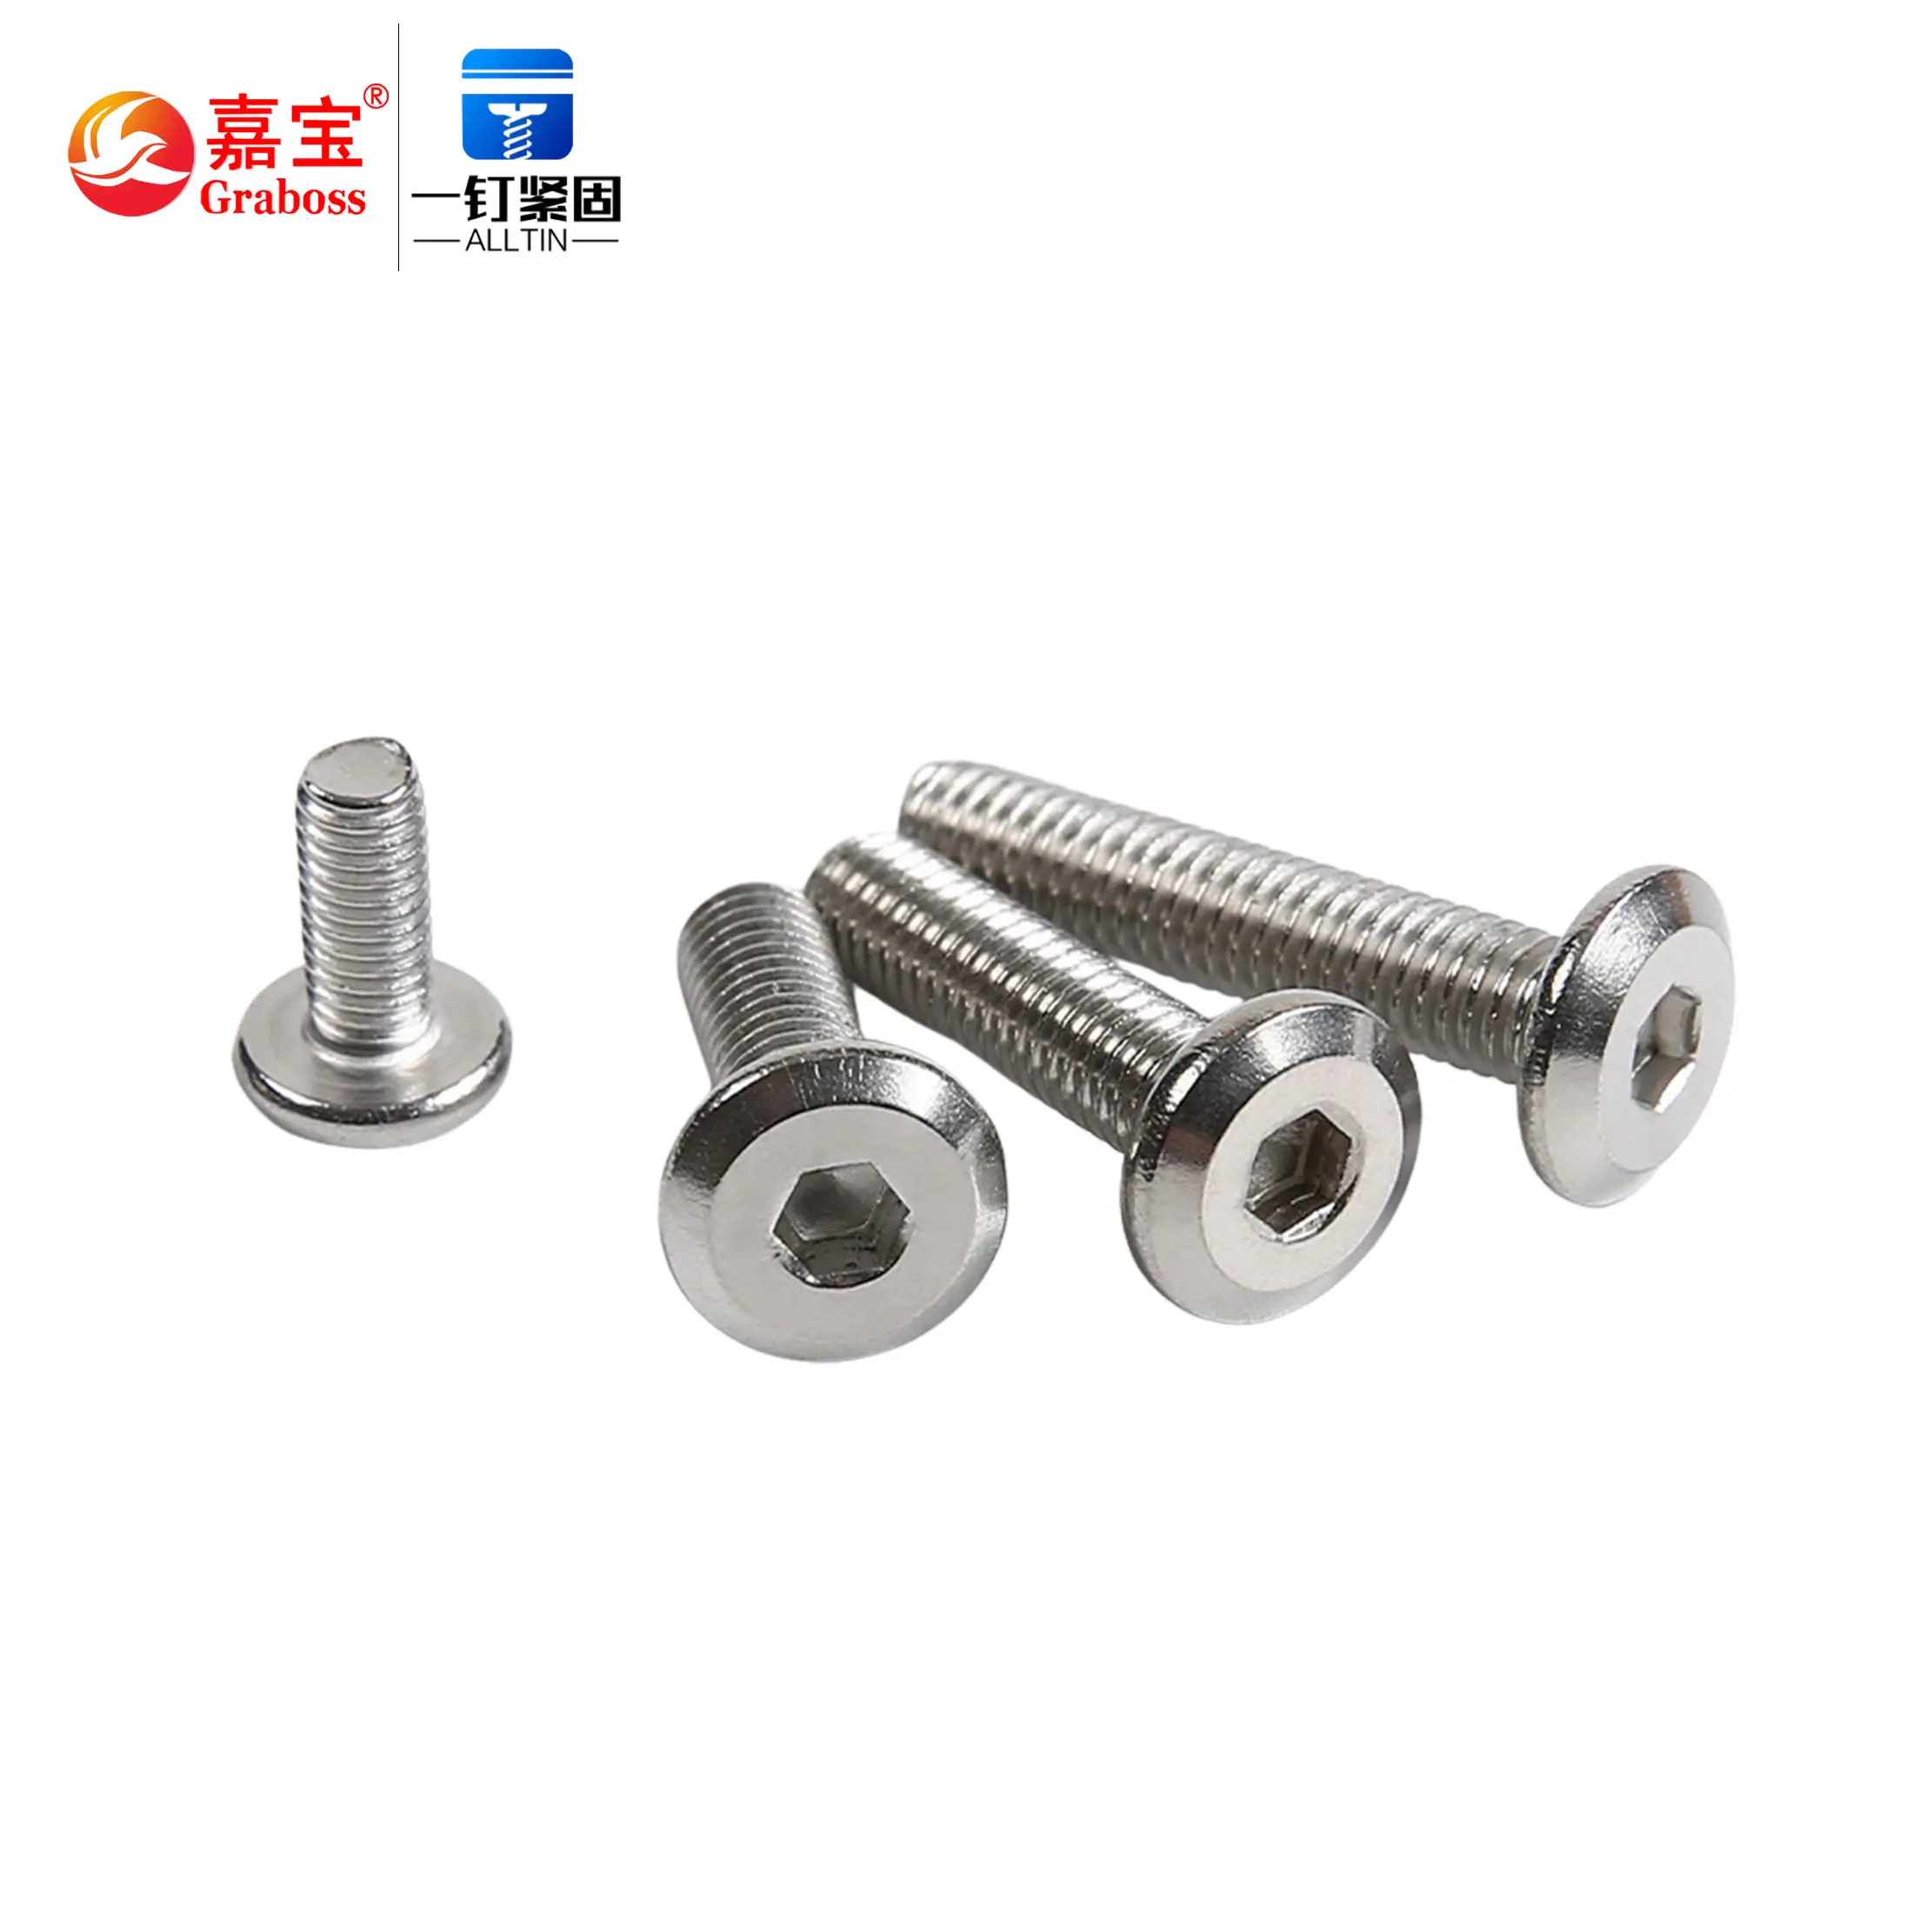 High quality factory direct sales 304 stainless steel flat head chamfered hex screws Furniture screws M3M4M5M6M8M10